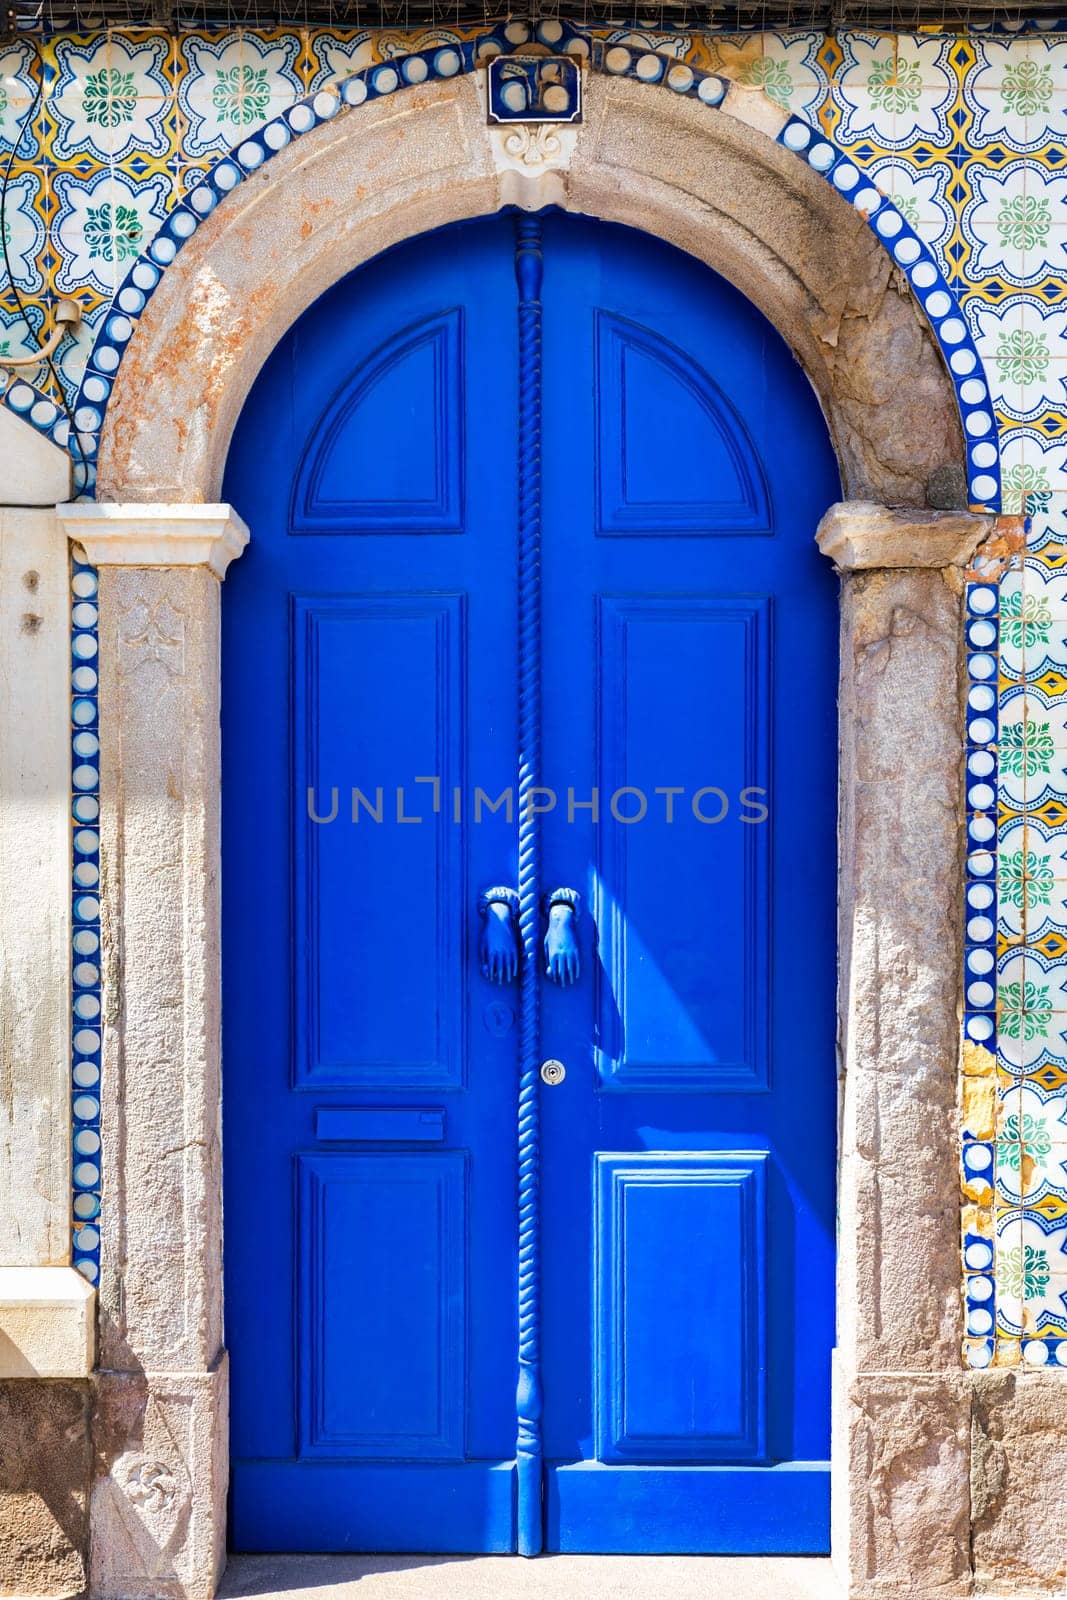 A blue door with a rope hanging from it, Tavira, Algarve, Portugal. by DaLiu